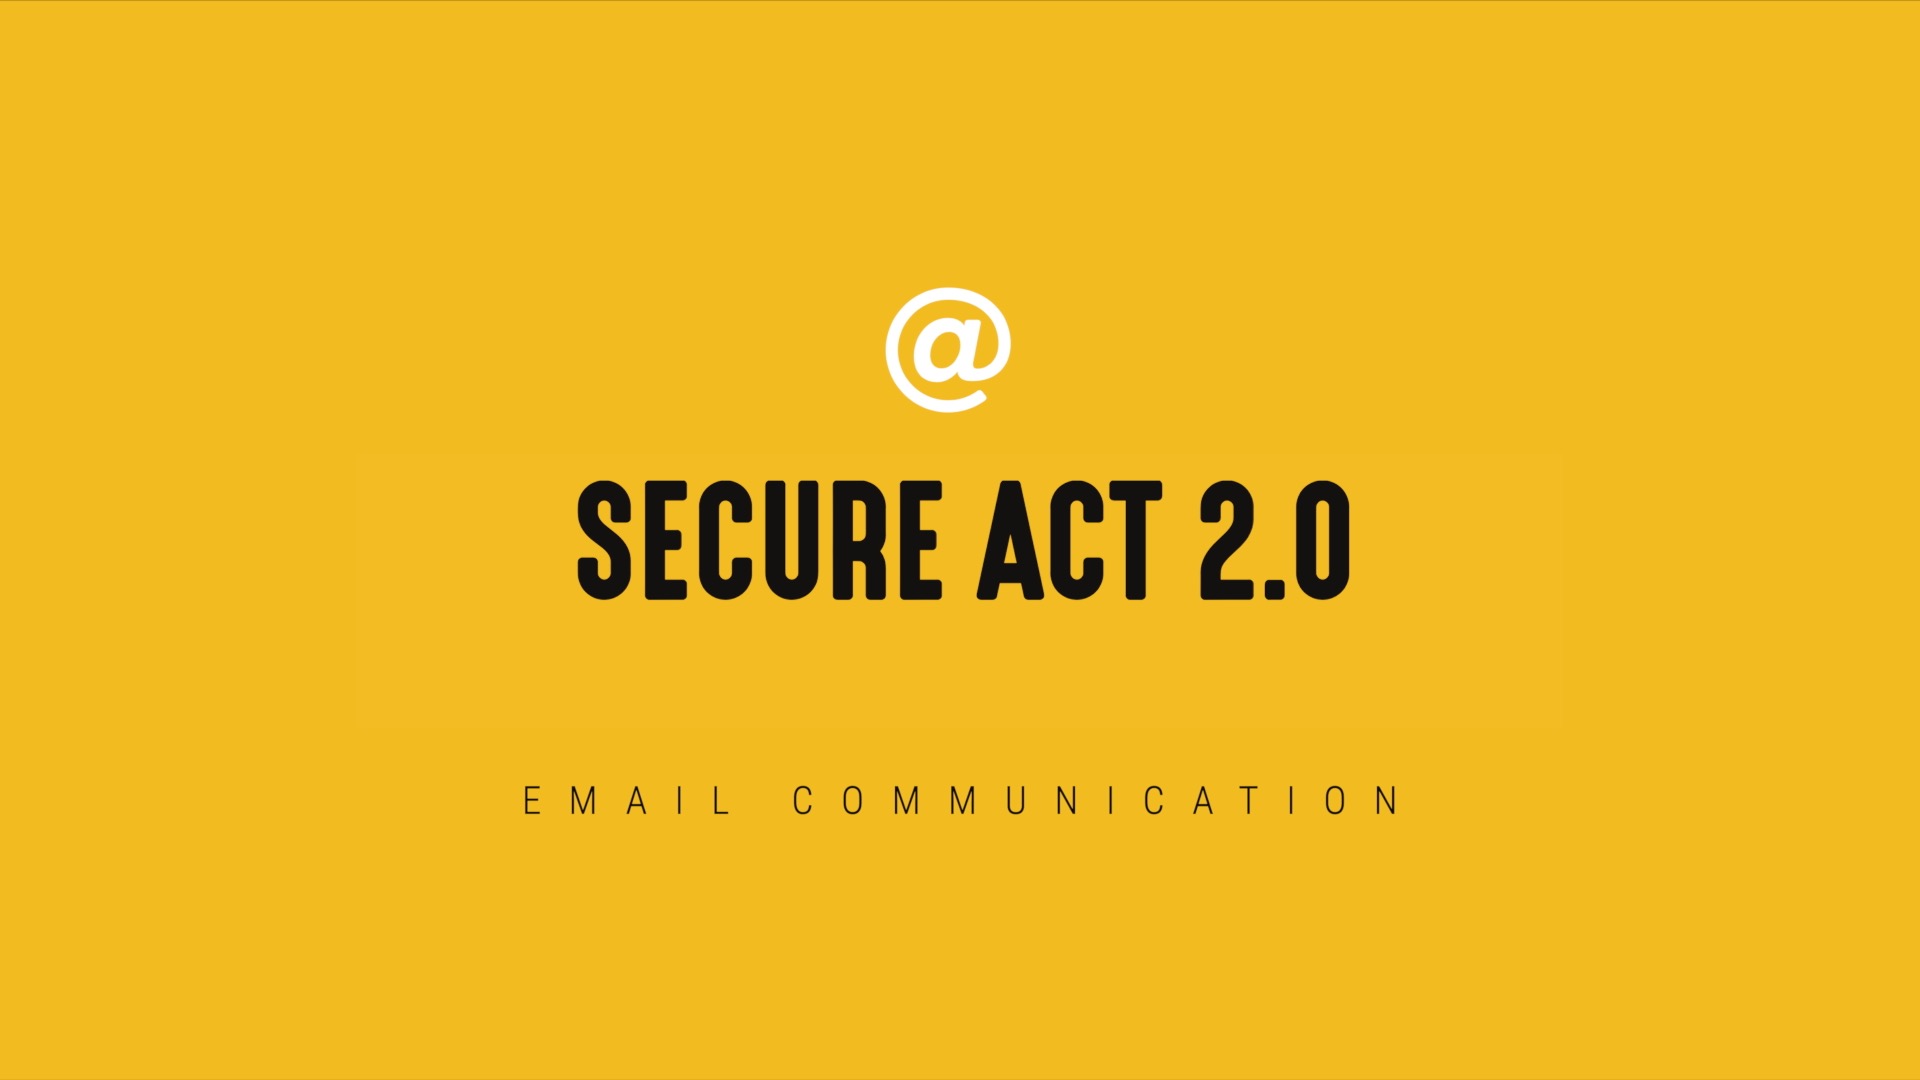 [NEW] SECURE Act 2.0 - Timely Email